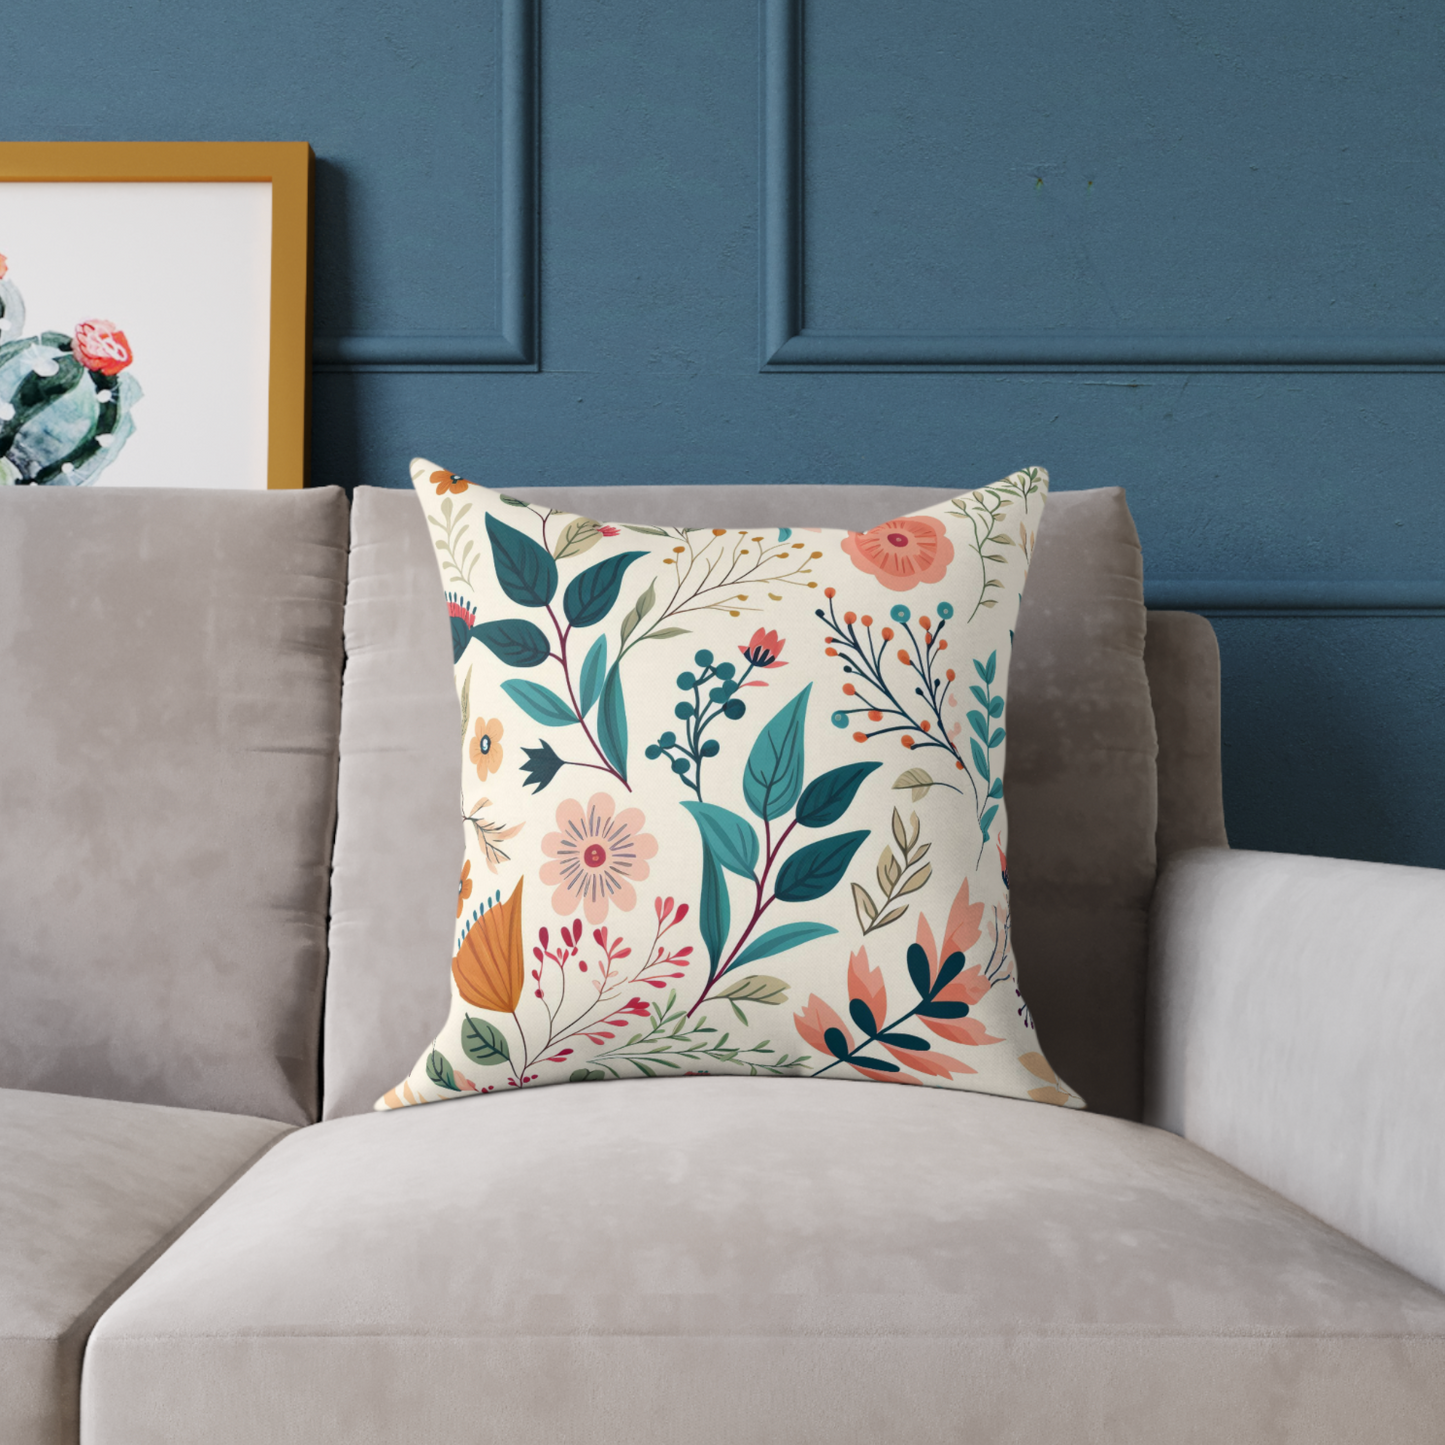 Pink and blue floral accent throw pillow on a couch, pink and blue botanical couch pillow on a chair, pink and blue floral pattern pillow on a lounger, pink and blue spring garden floral decorative pillow on a bed